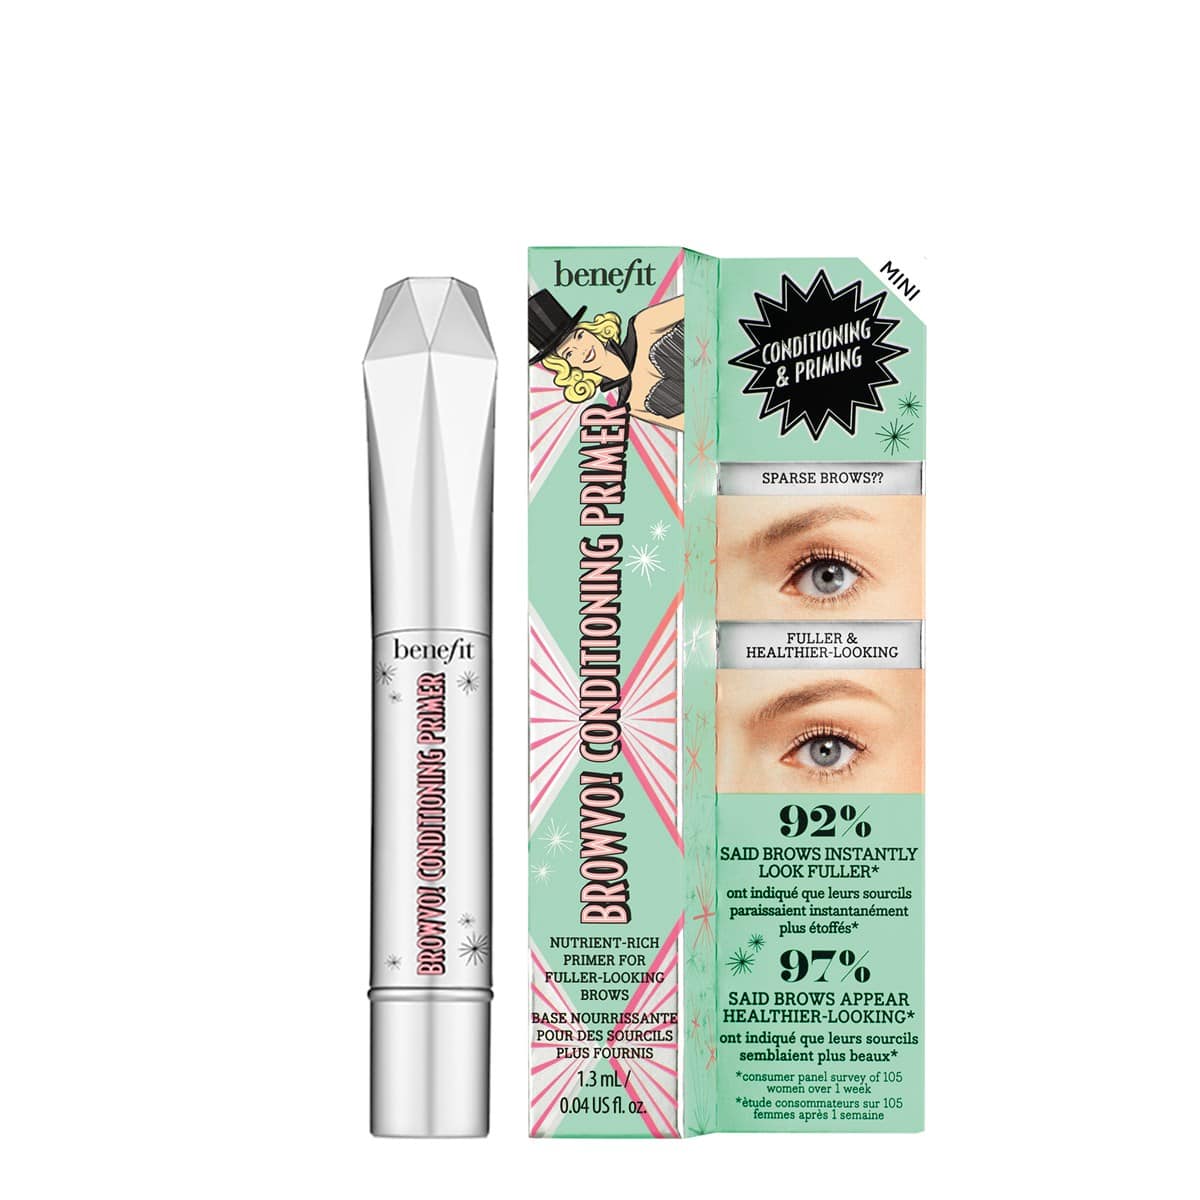 BROWVO! Conditioning Eyebrow Primer Mini by Benefit